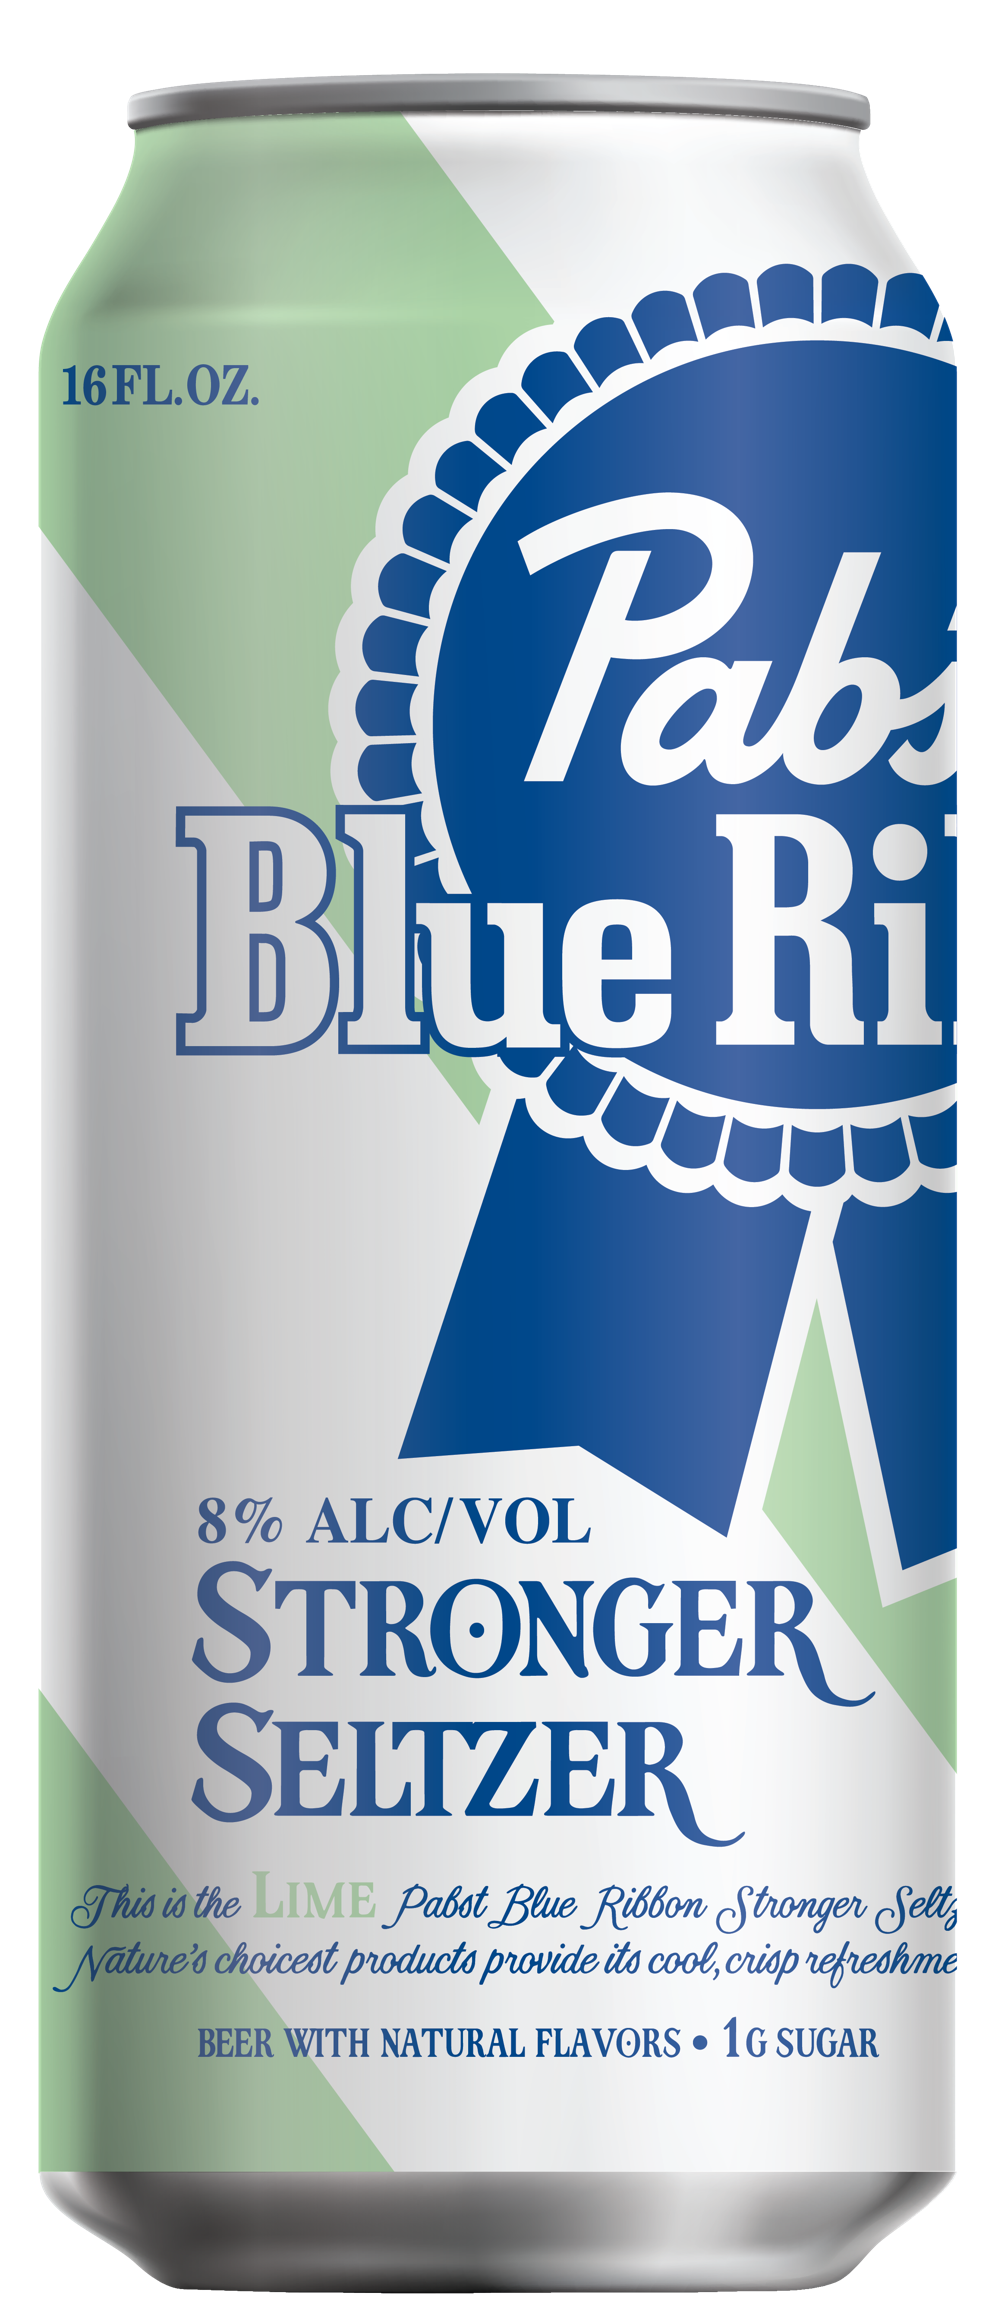 Pabst Blue Ribbon Rolls Out Stronger Seltzer This August